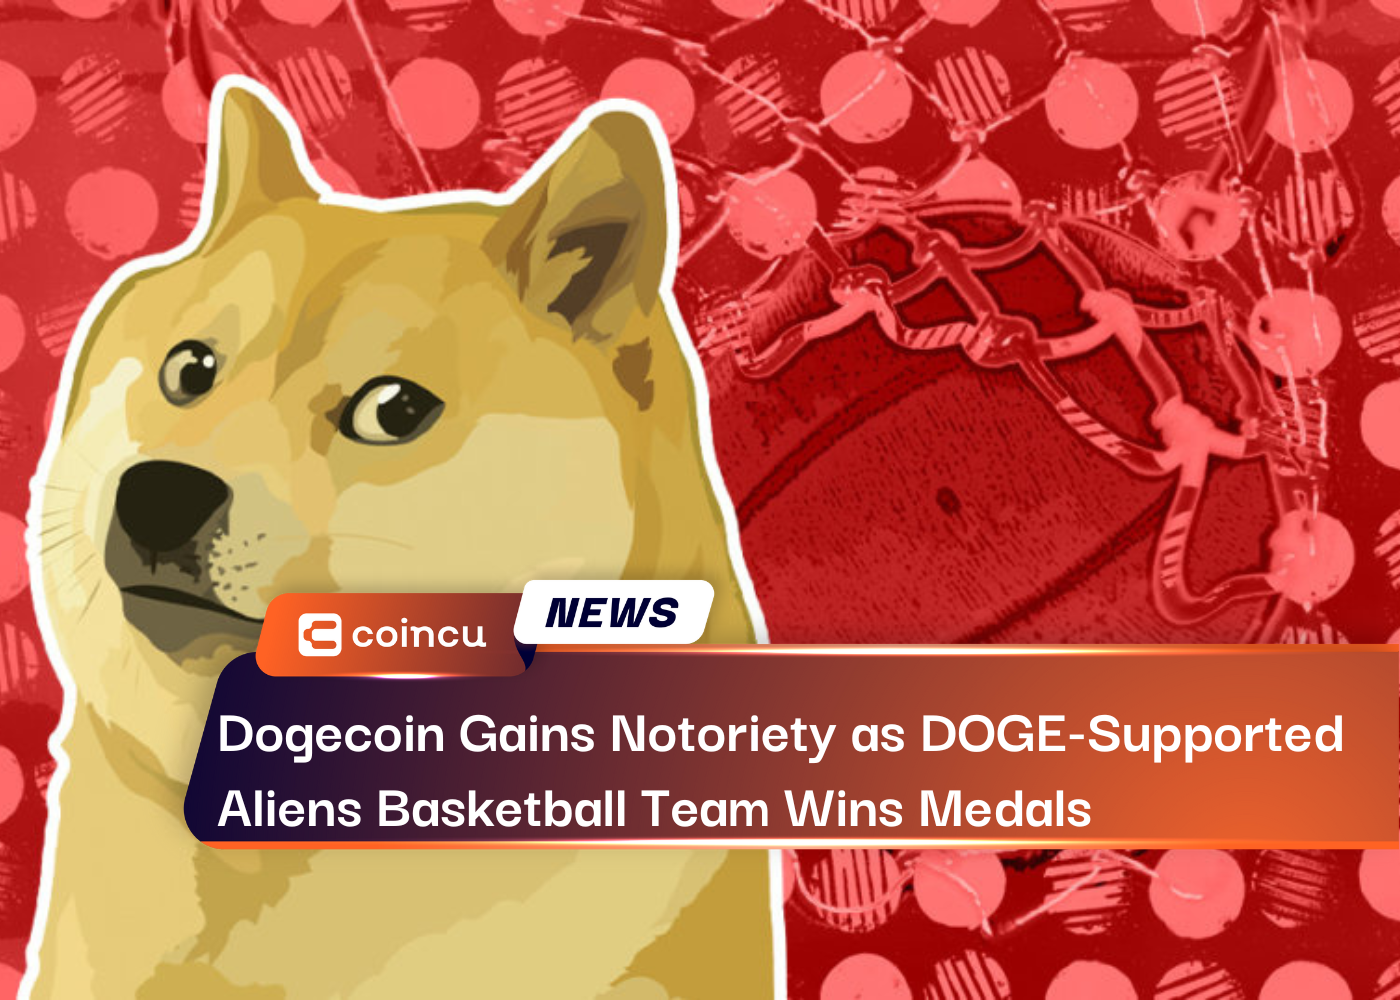 Dogecoin Gains Notoriety as DOGE Supported